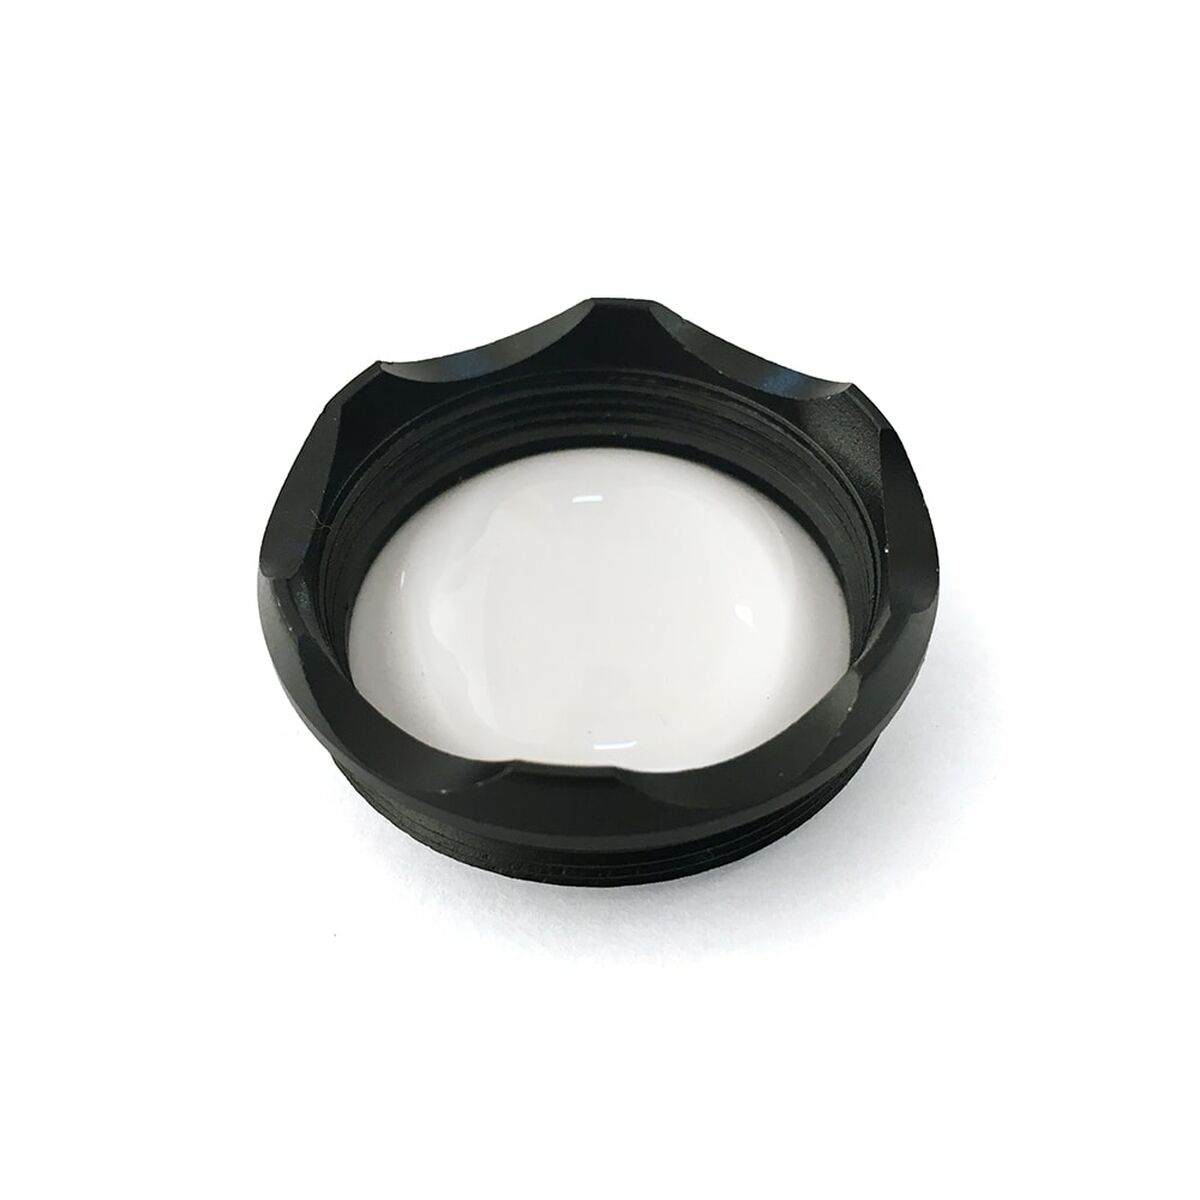 Magnifying glass EDM 36100 Replacement Torch